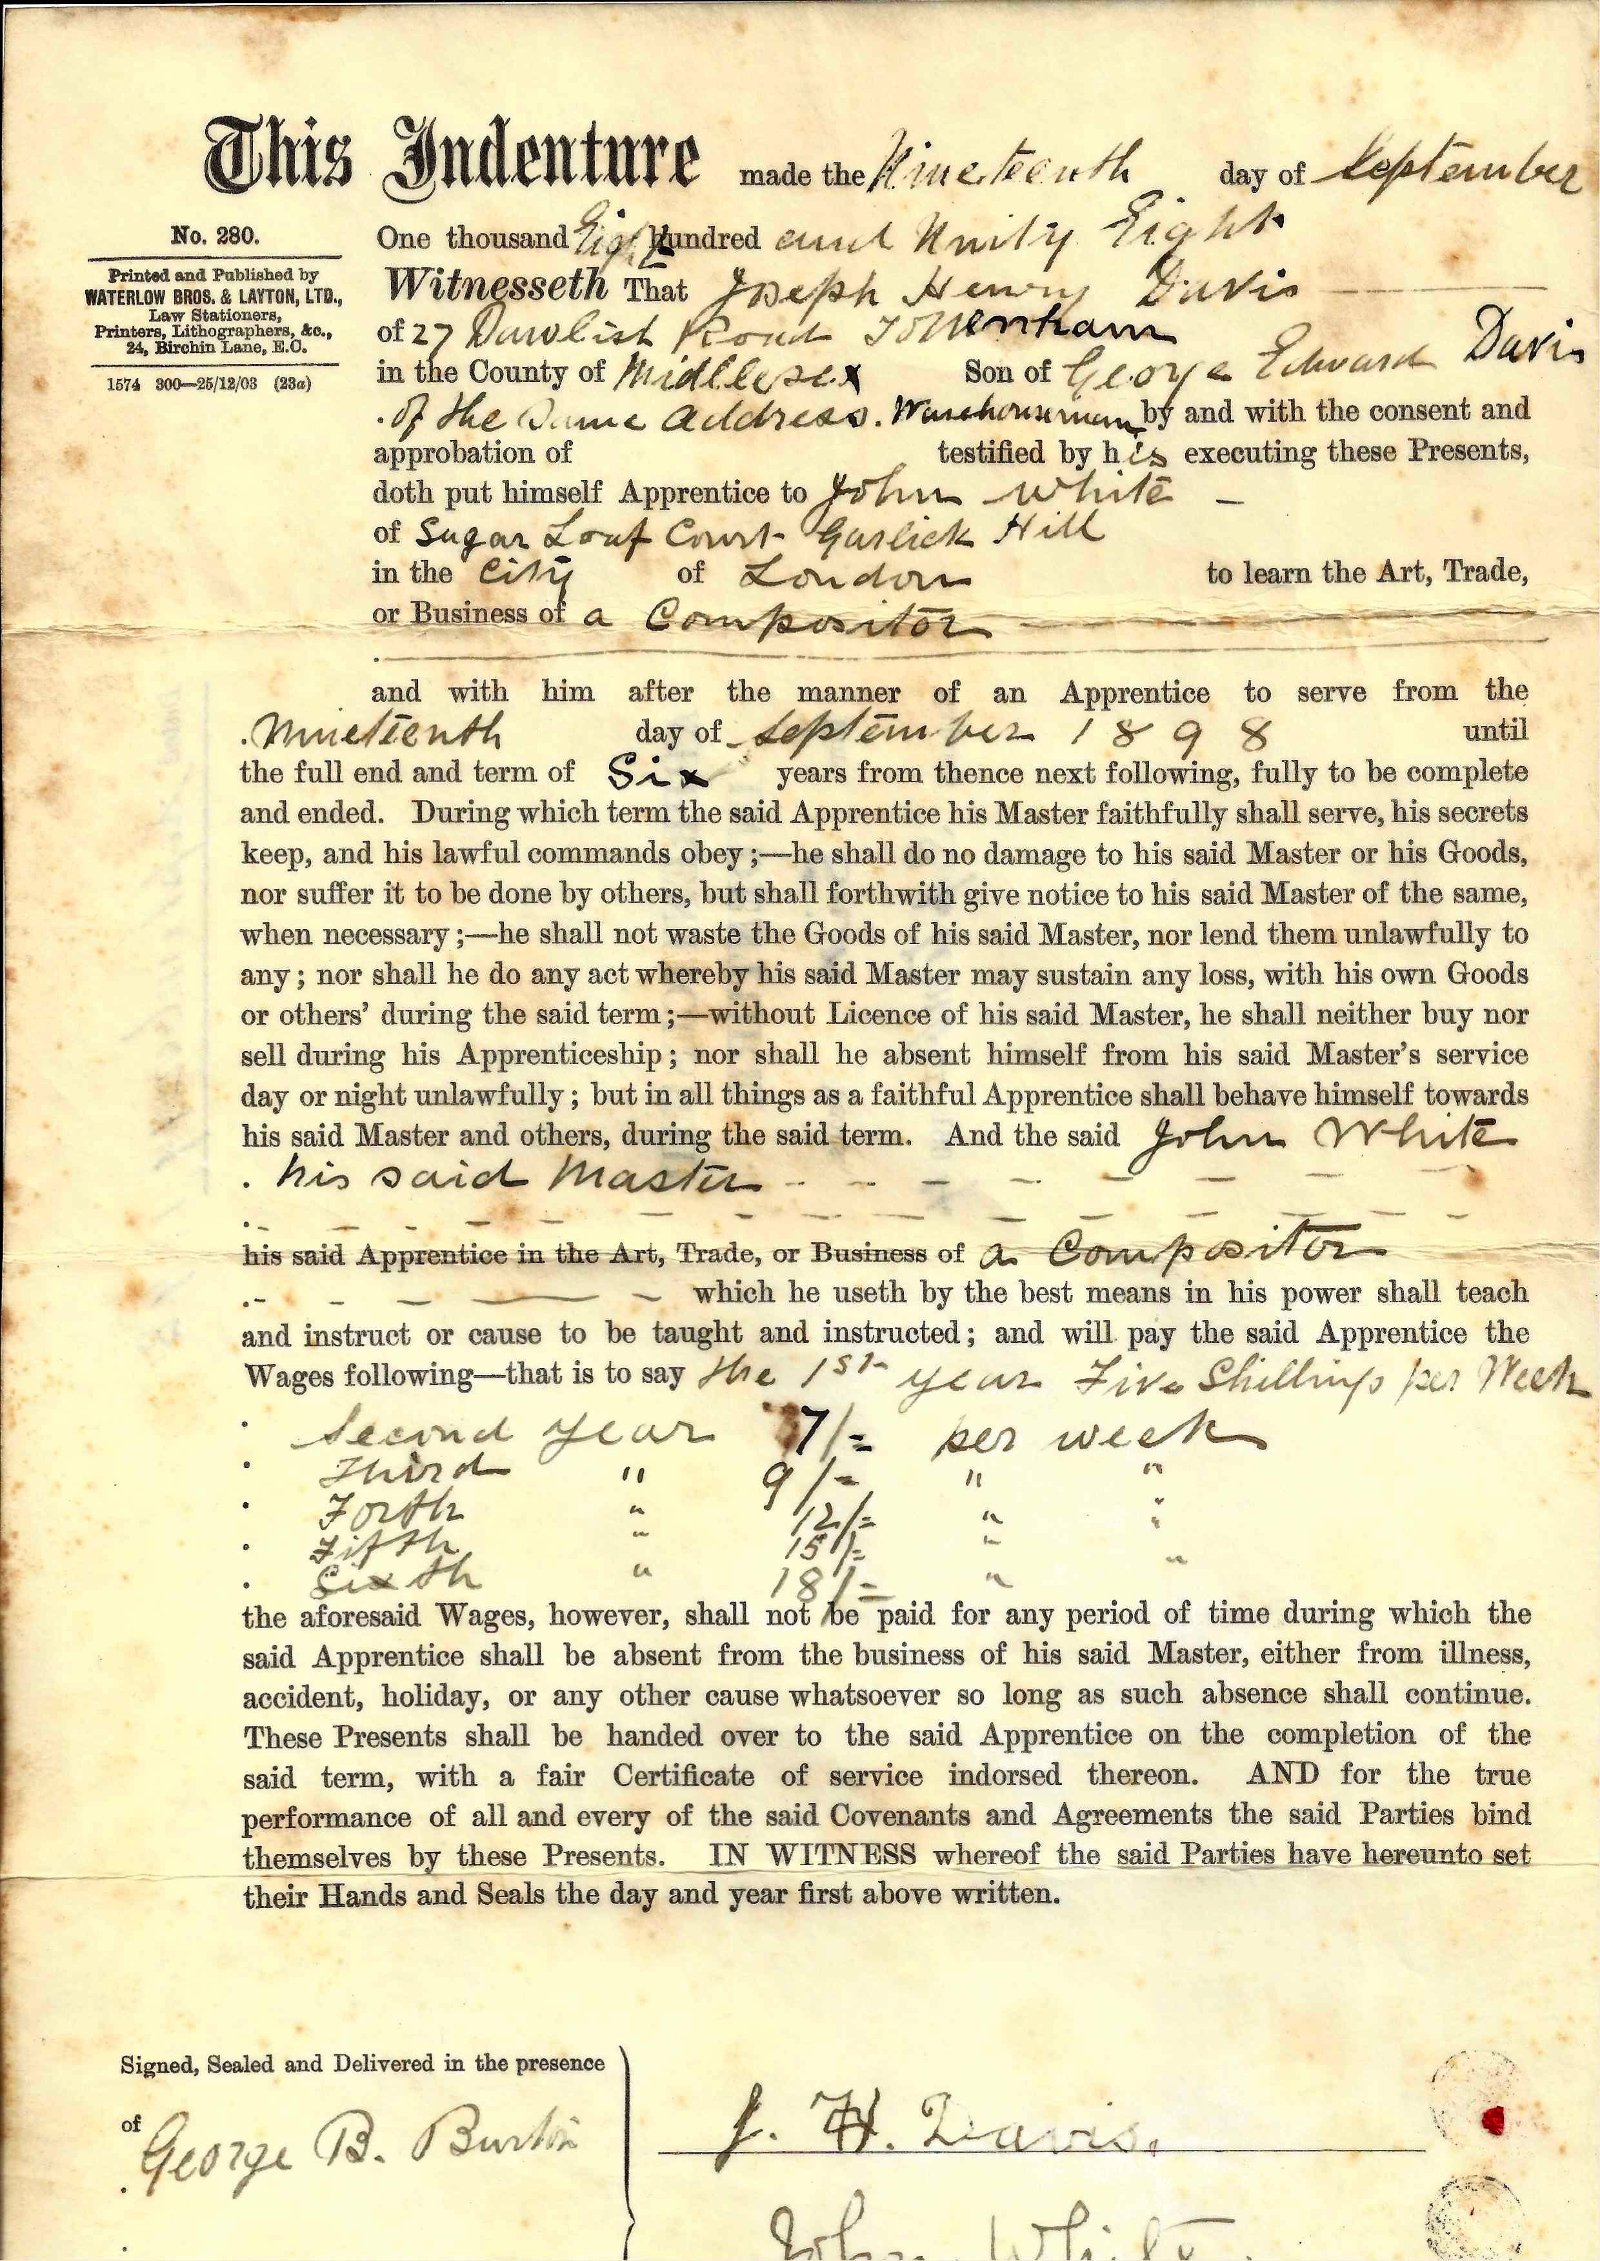 Indenture document from 1891